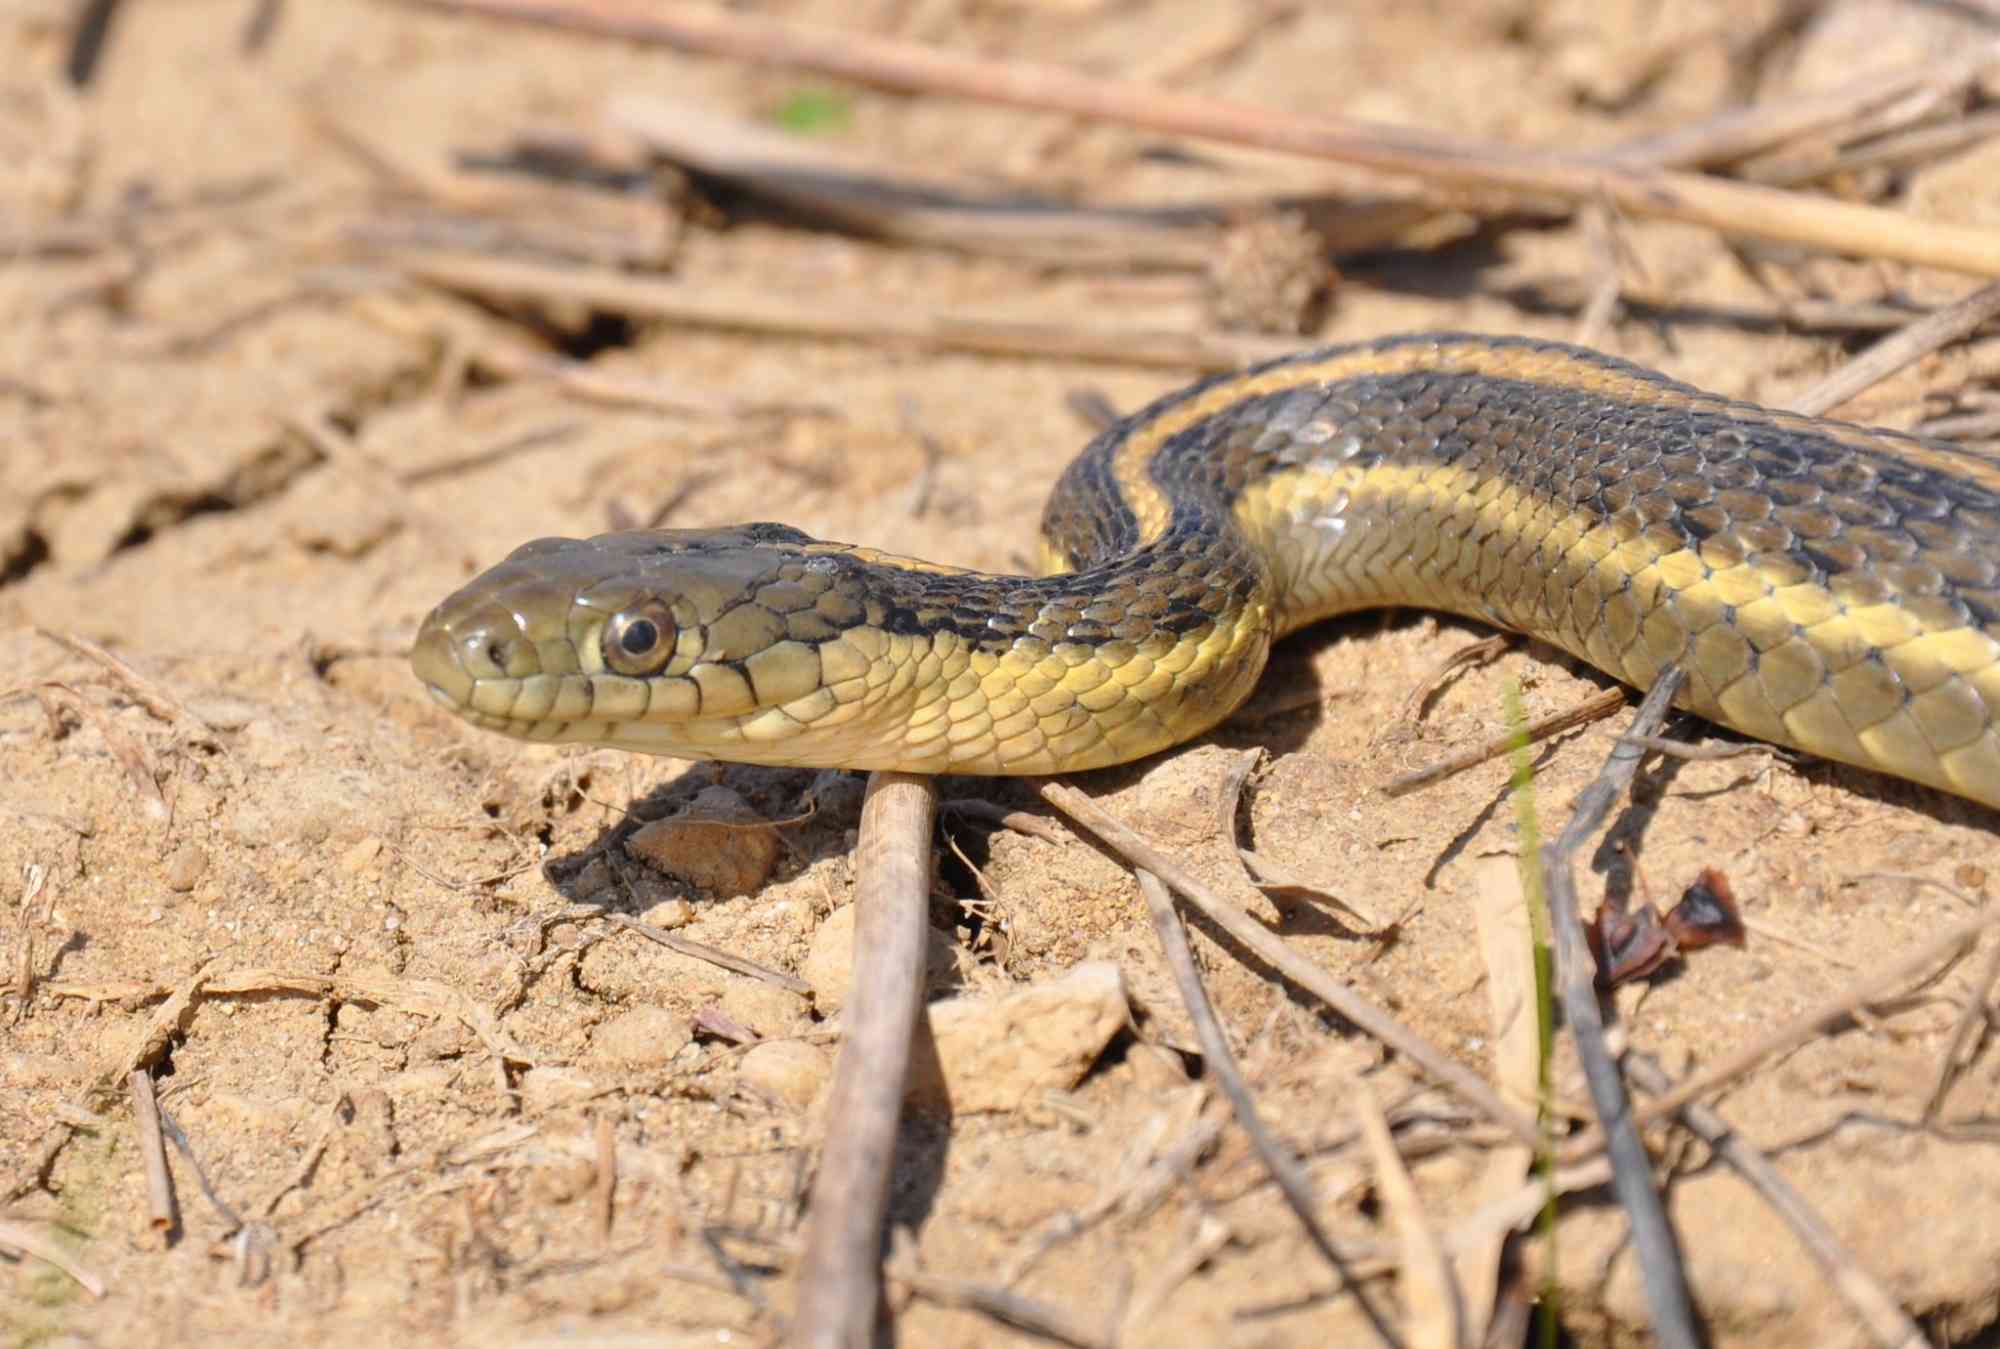 Giant garter snake April 19, 2011 on private property in the upper Delta below the city of Davis